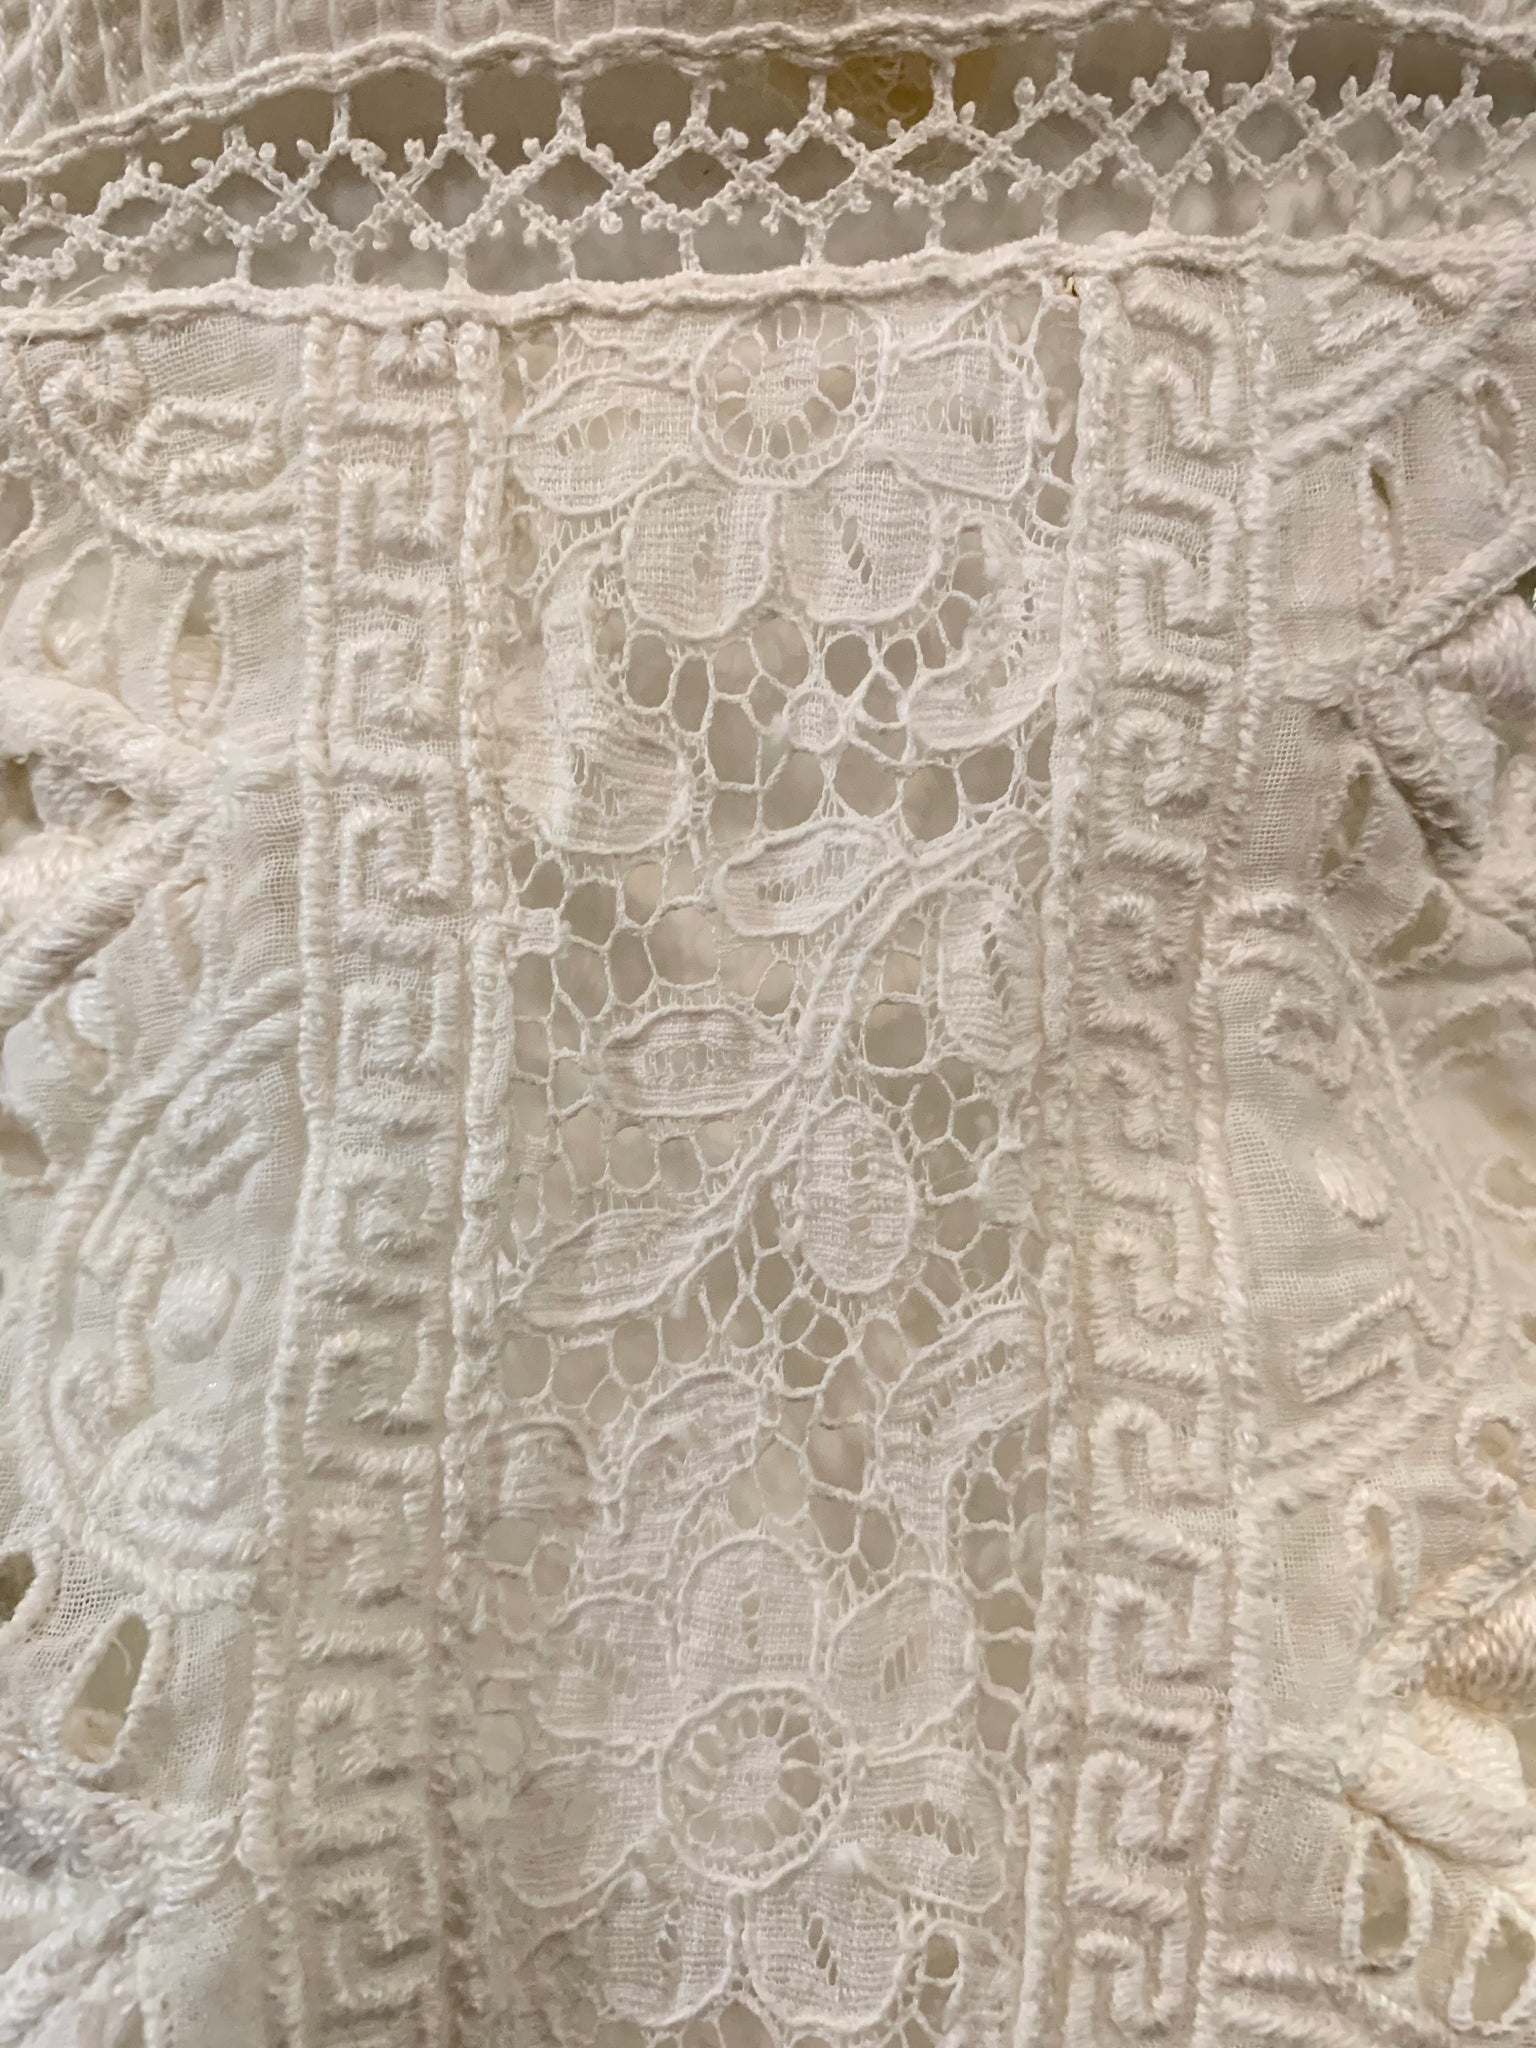  Incredible Edwardian White Blouse with Intricate Hand Done Embroidery and Lace DETAIL 6 of 6